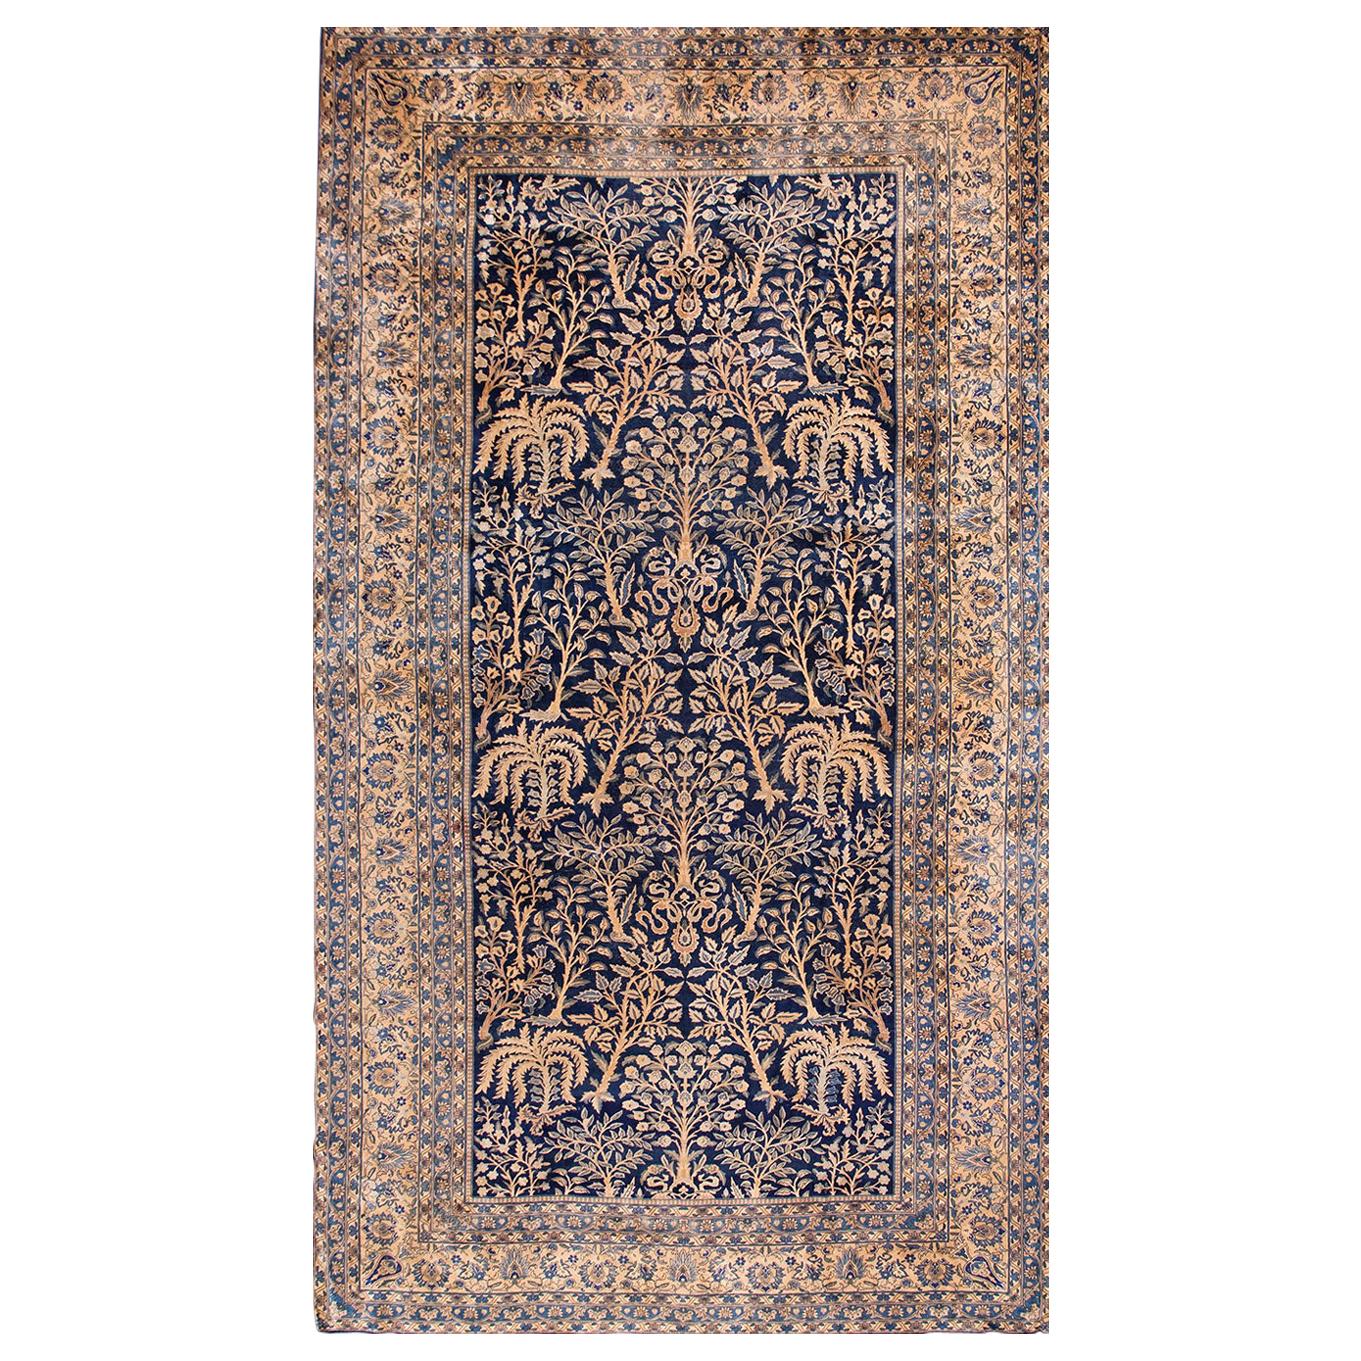 Early 20th Century Indian Lahore Carpet ( 9'10" x 17'10" - 300 x 545 ) For Sale